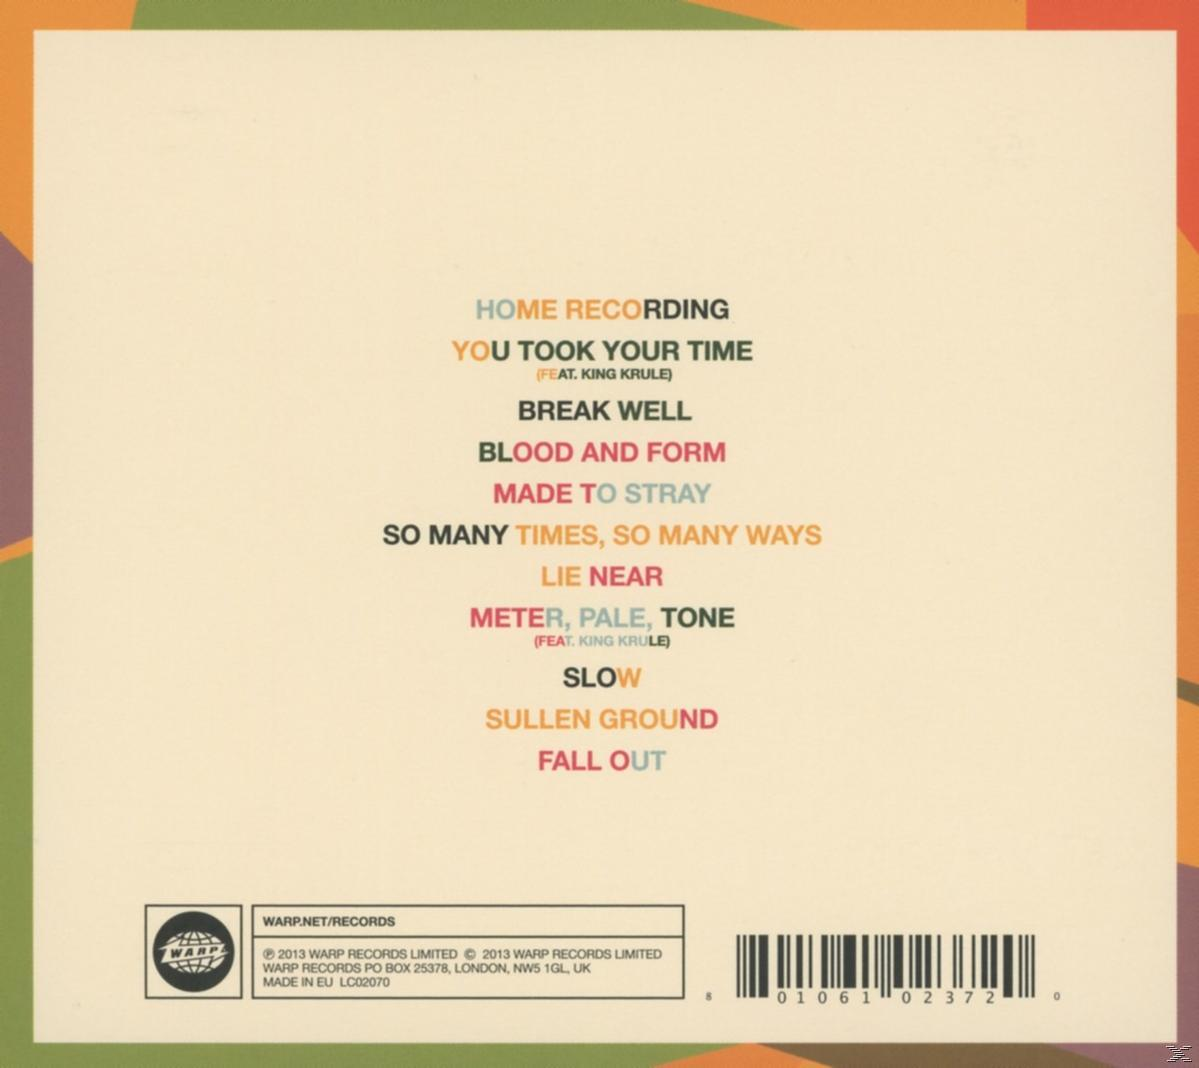 Mount Kimbie - Cold Spring Fault Less - Youth (CD)